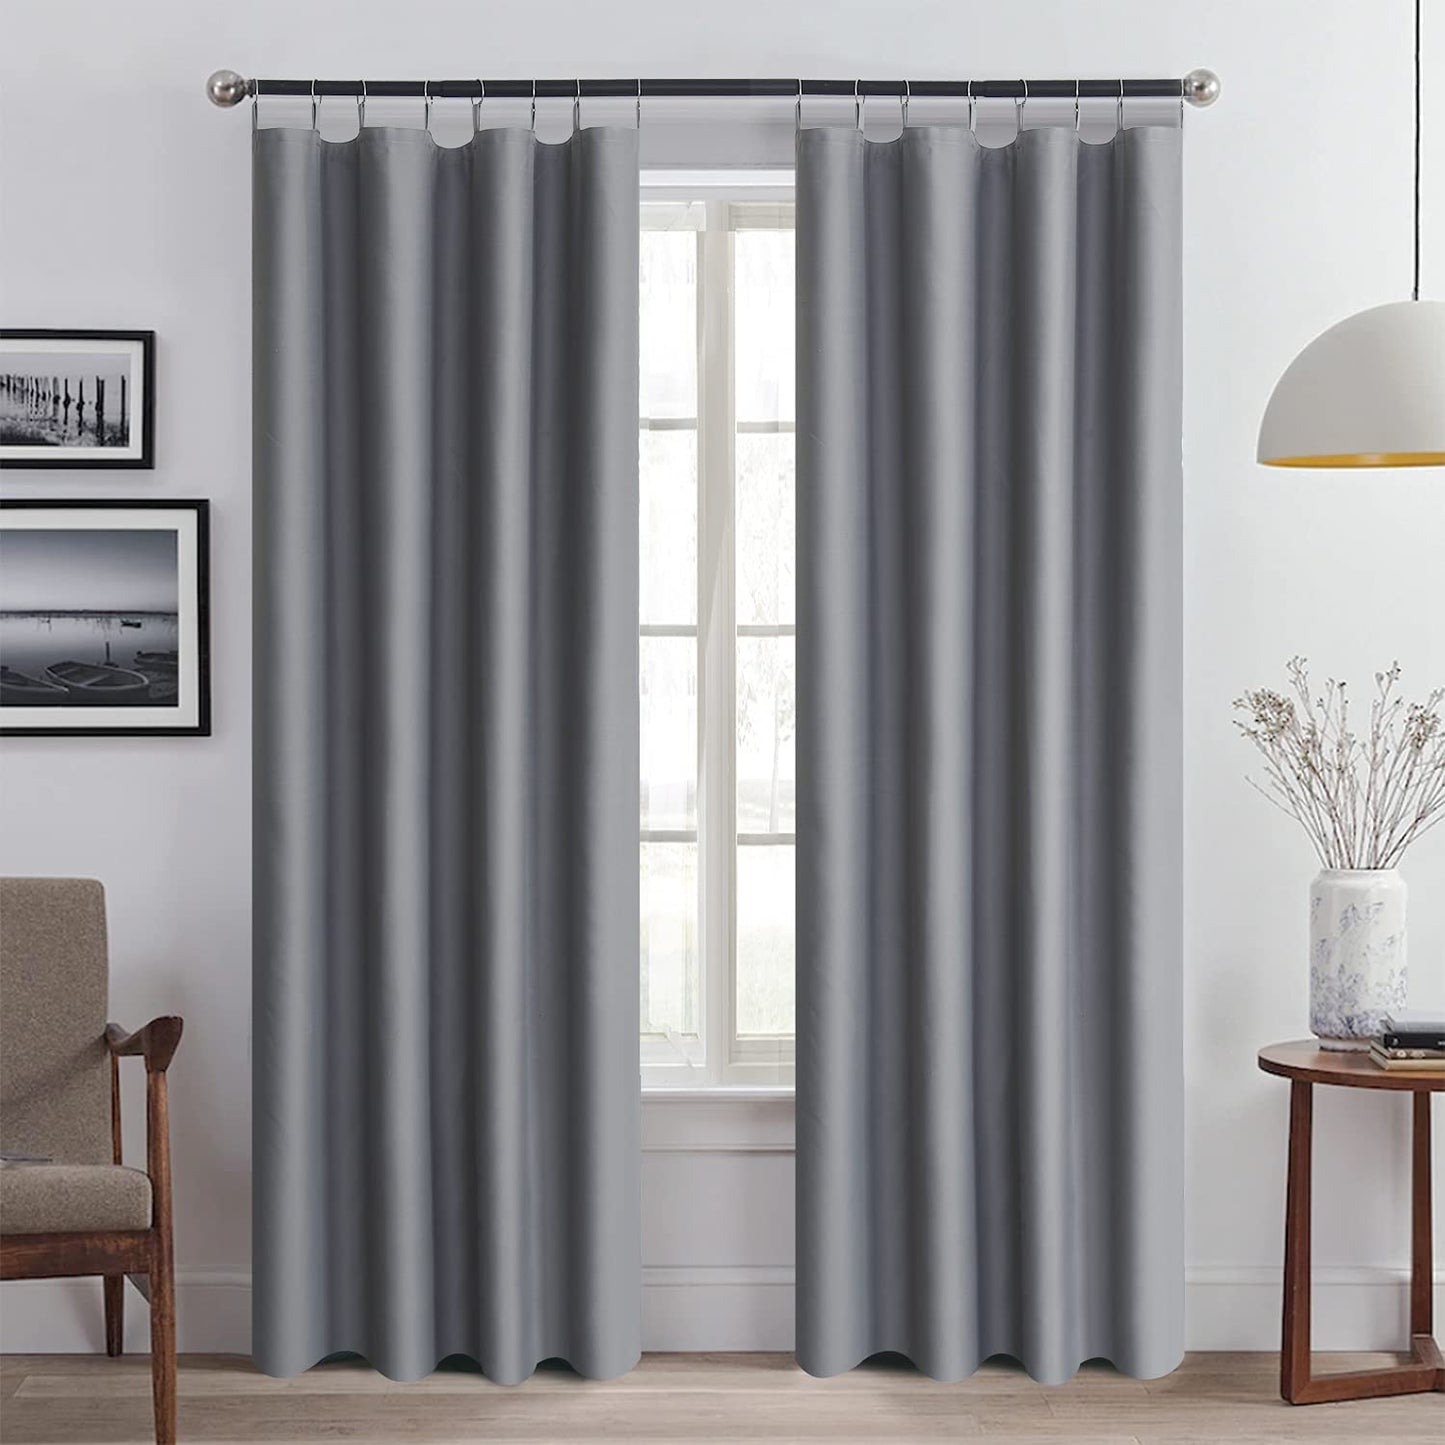 Thermal Insulated Blackout Curtain Liner 1 Panel for bedroom